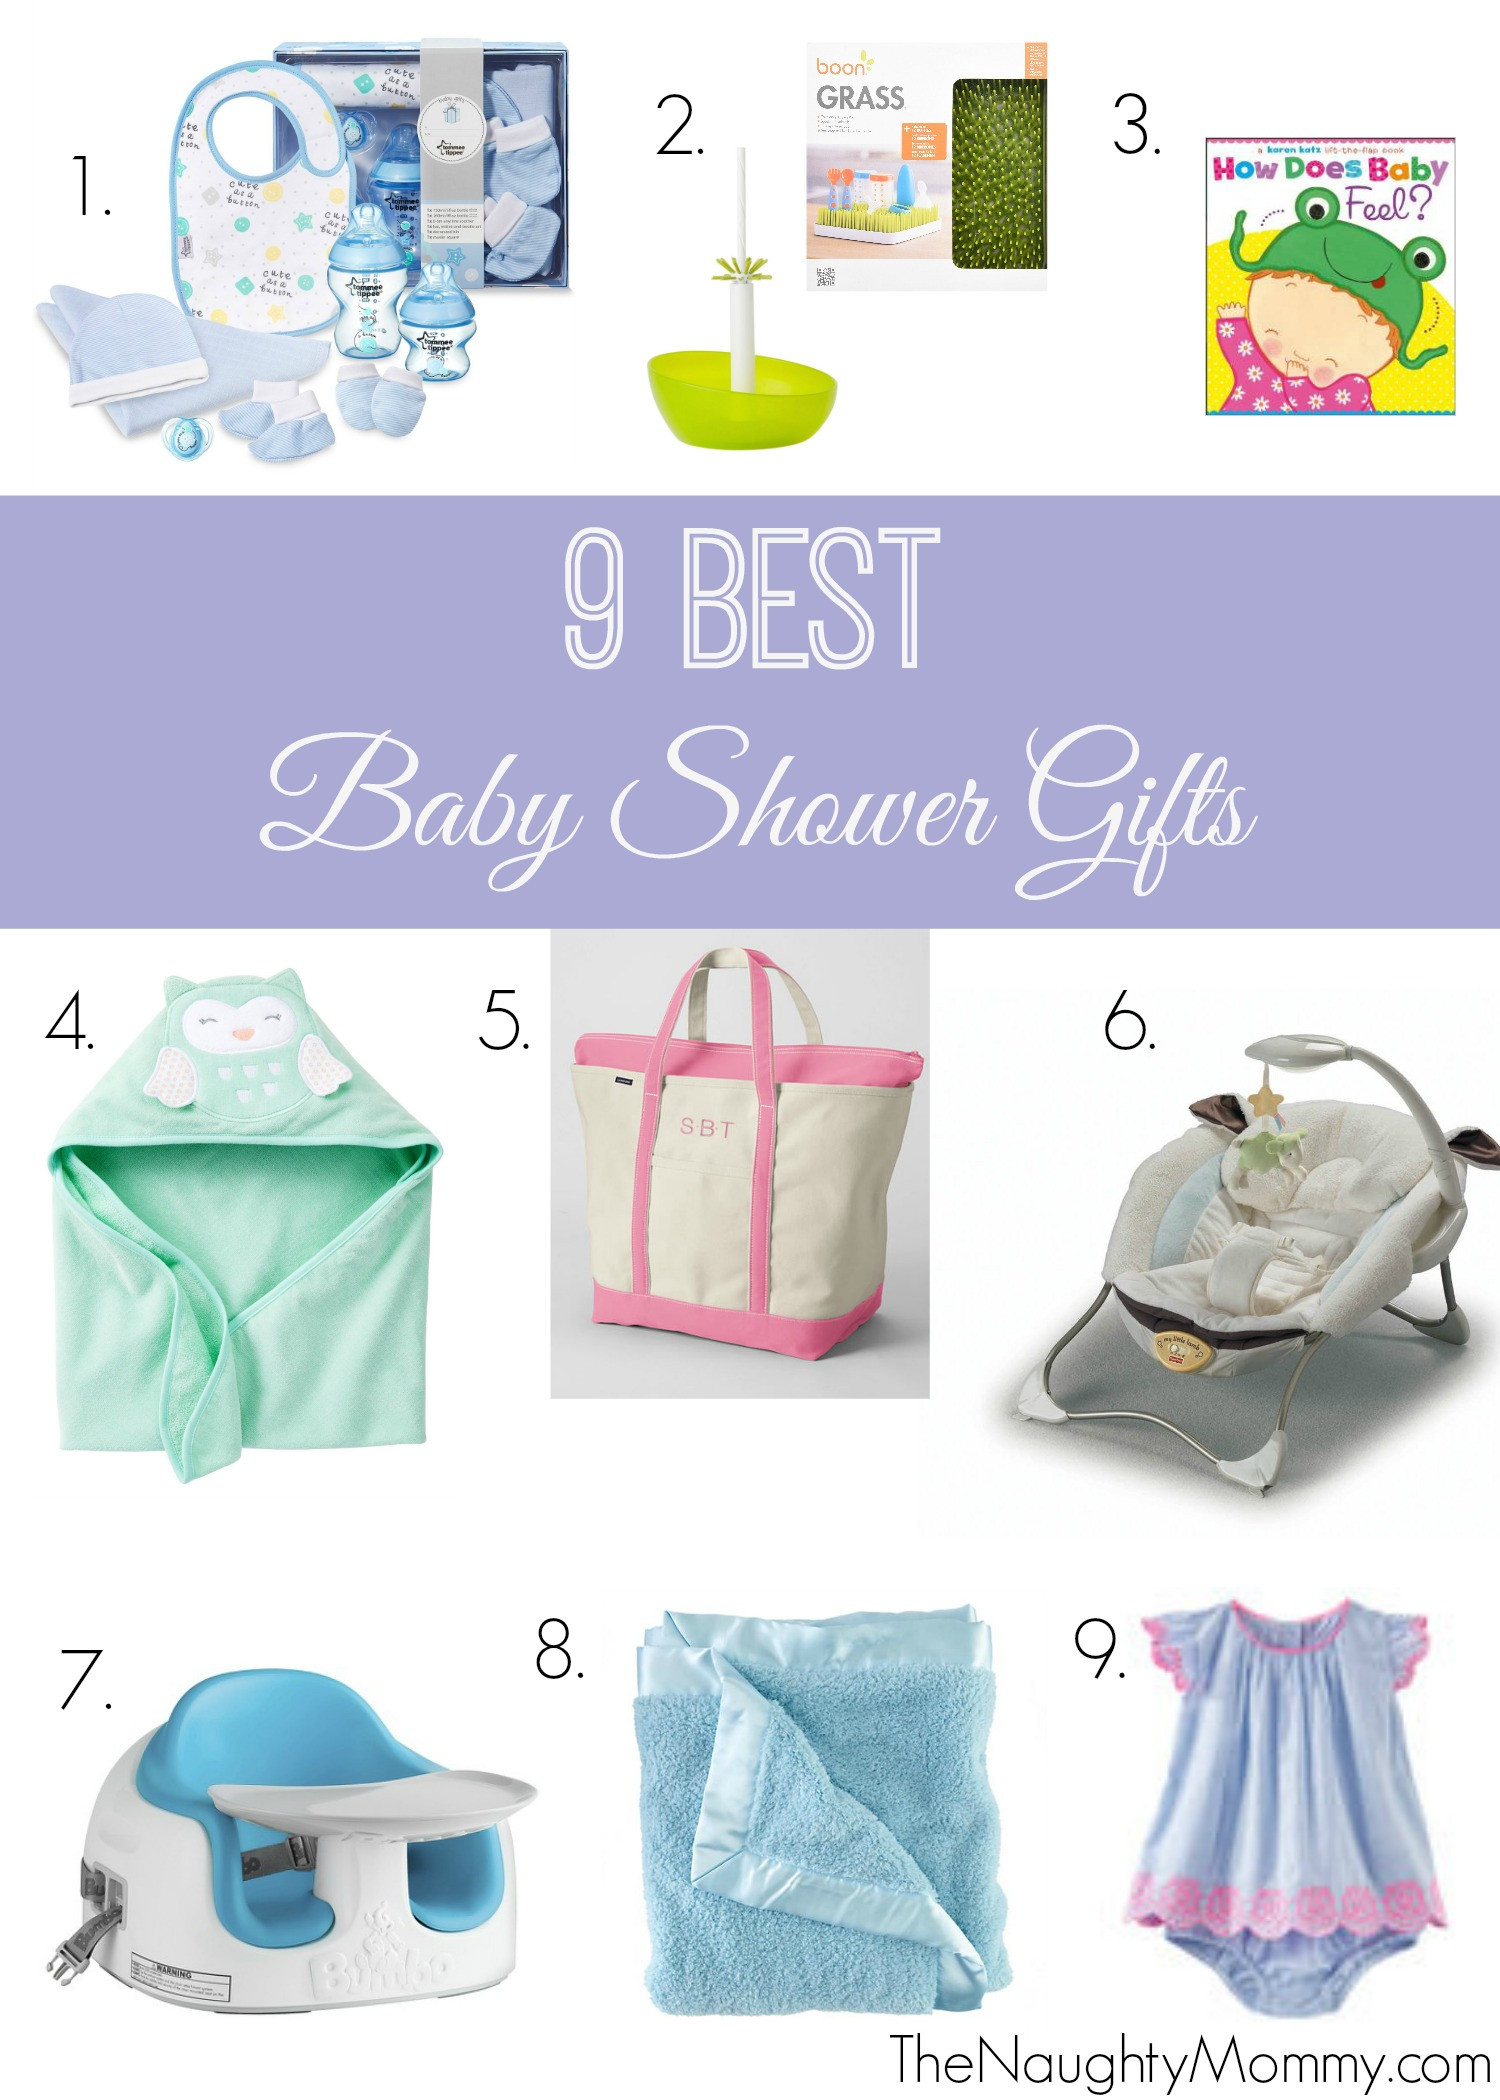 Good Baby Shower Gifts
 9 Best Baby Shower Gifts The Naughty Mommy